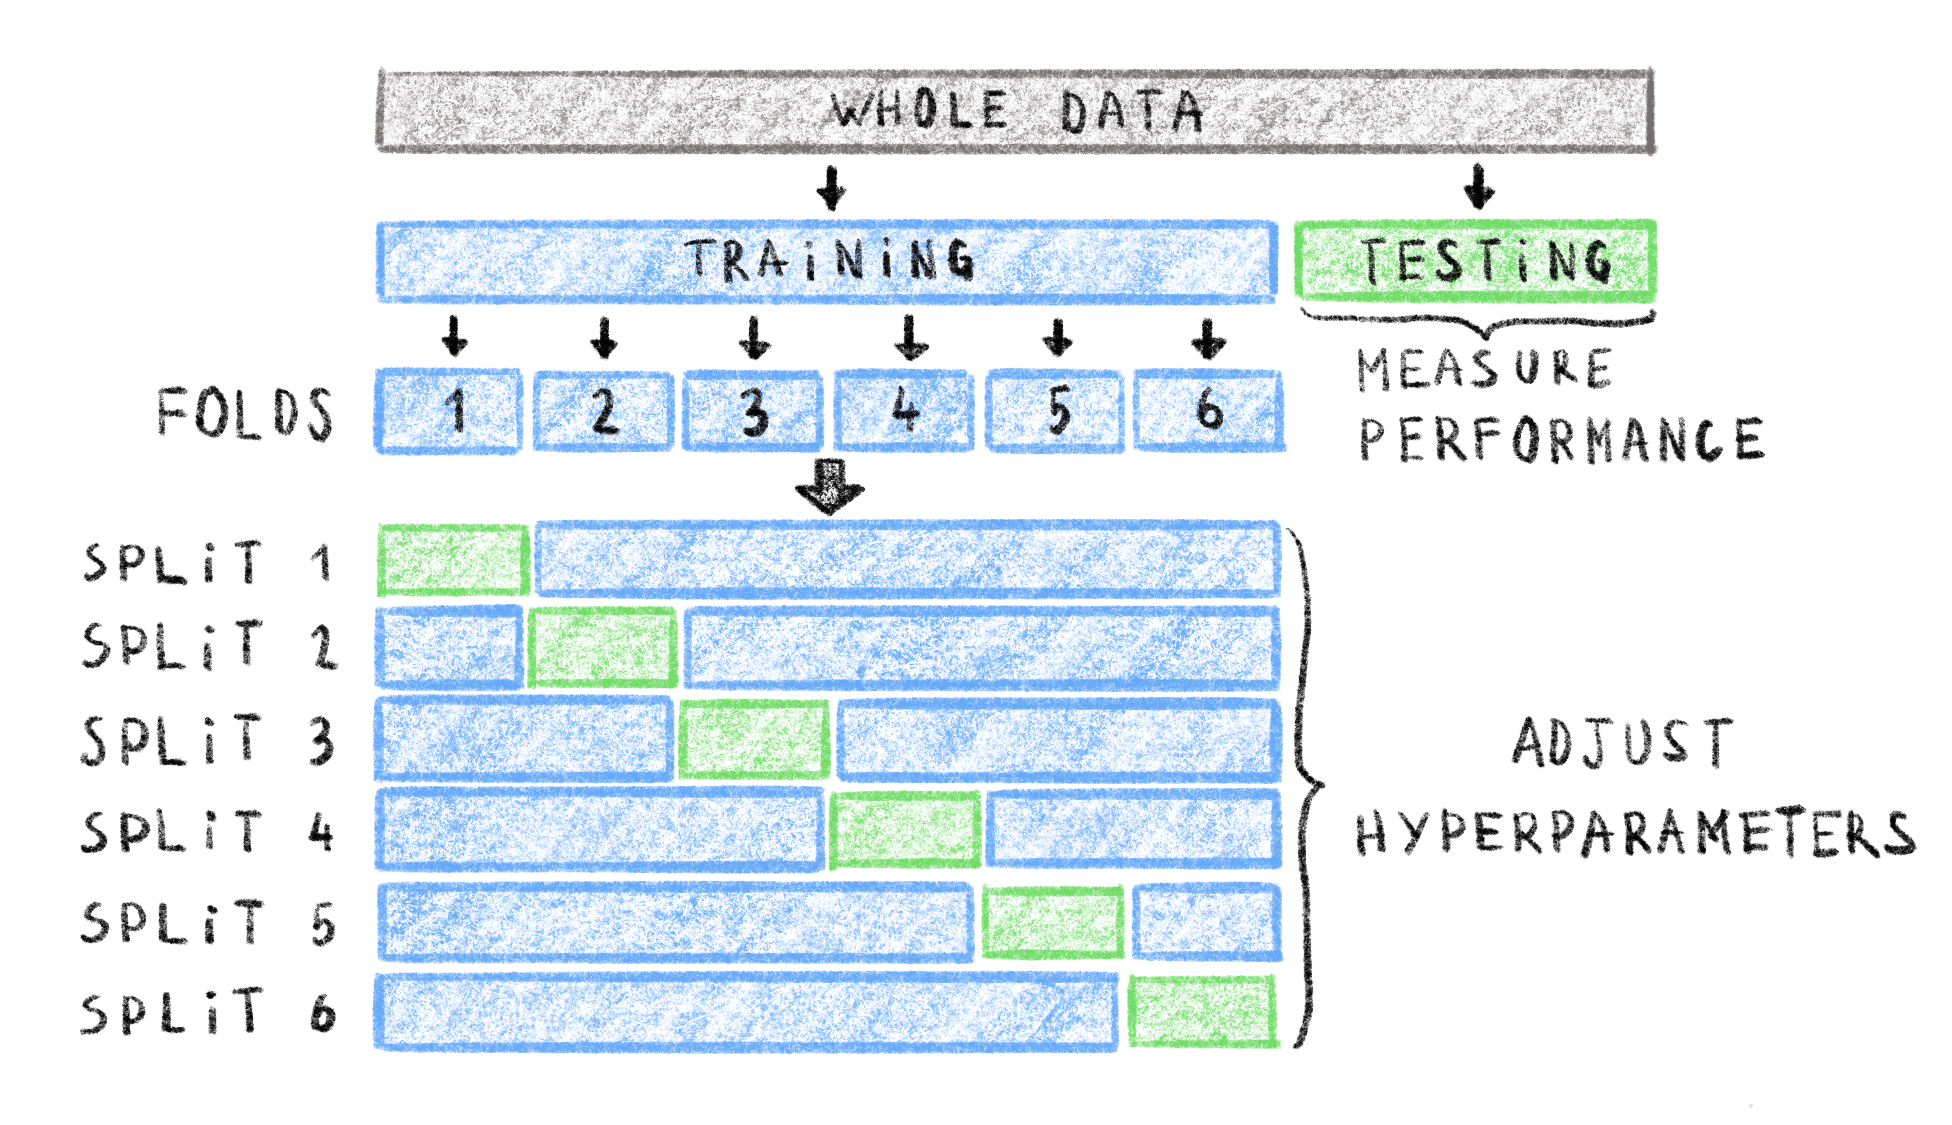 **Example of data splits into training, testing and validation sets with 6-fold cross-validation.**  
In this setting, the whole data set is first split into a training and testing set. The testing set is kept separate to assess final model performance. The training set is split into 6 folds resulting in 6 splits. In each split of the training set, the correspoding fold is used as the within-split test set (green), and the rest of the training set is used as the within-split training set (blue). You can get an idea of the model performance by averaging measures on within-split testing sets and adjusting hyper-parameters accordingly, without using the global, reserved testing set. Adapted from <https://scikit-learn.org/stable/modules/cross_validation.html>